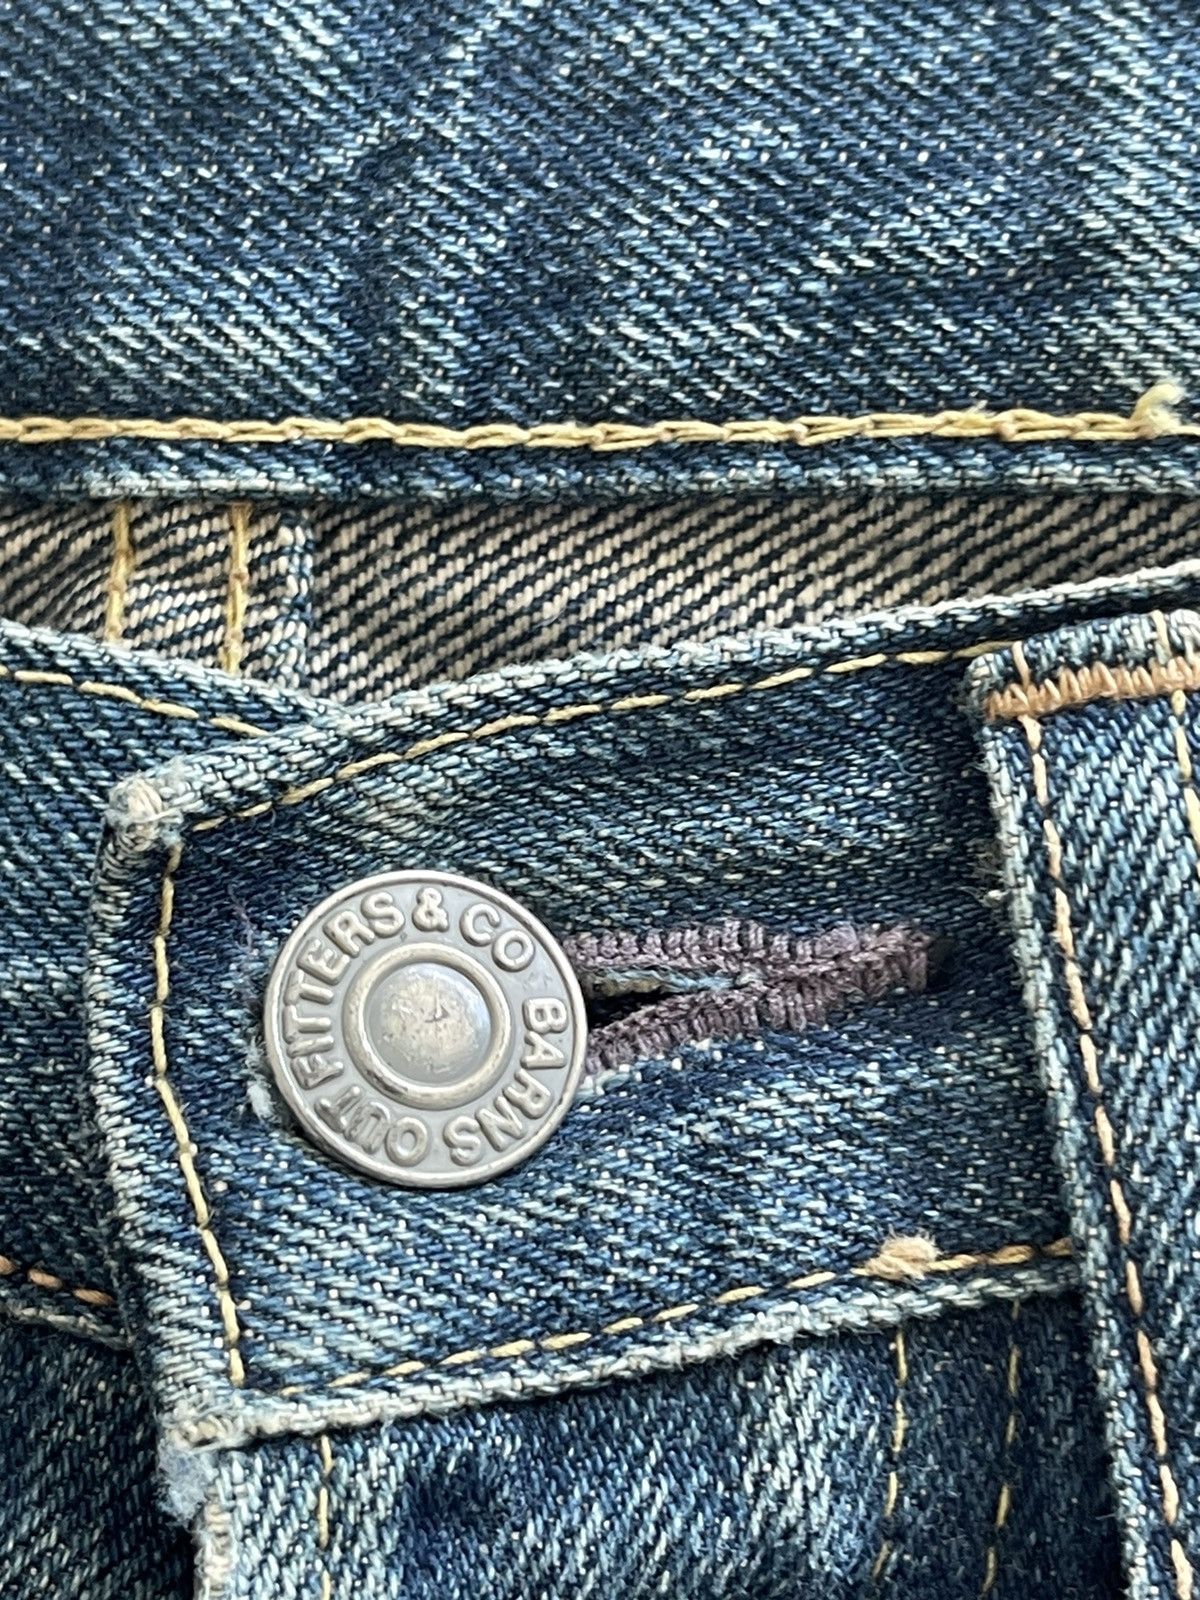 Japanese Brand - JAPANESE REPRO DENIM JEANS, BARNS OUTFITTERS & CO BRAND - 7